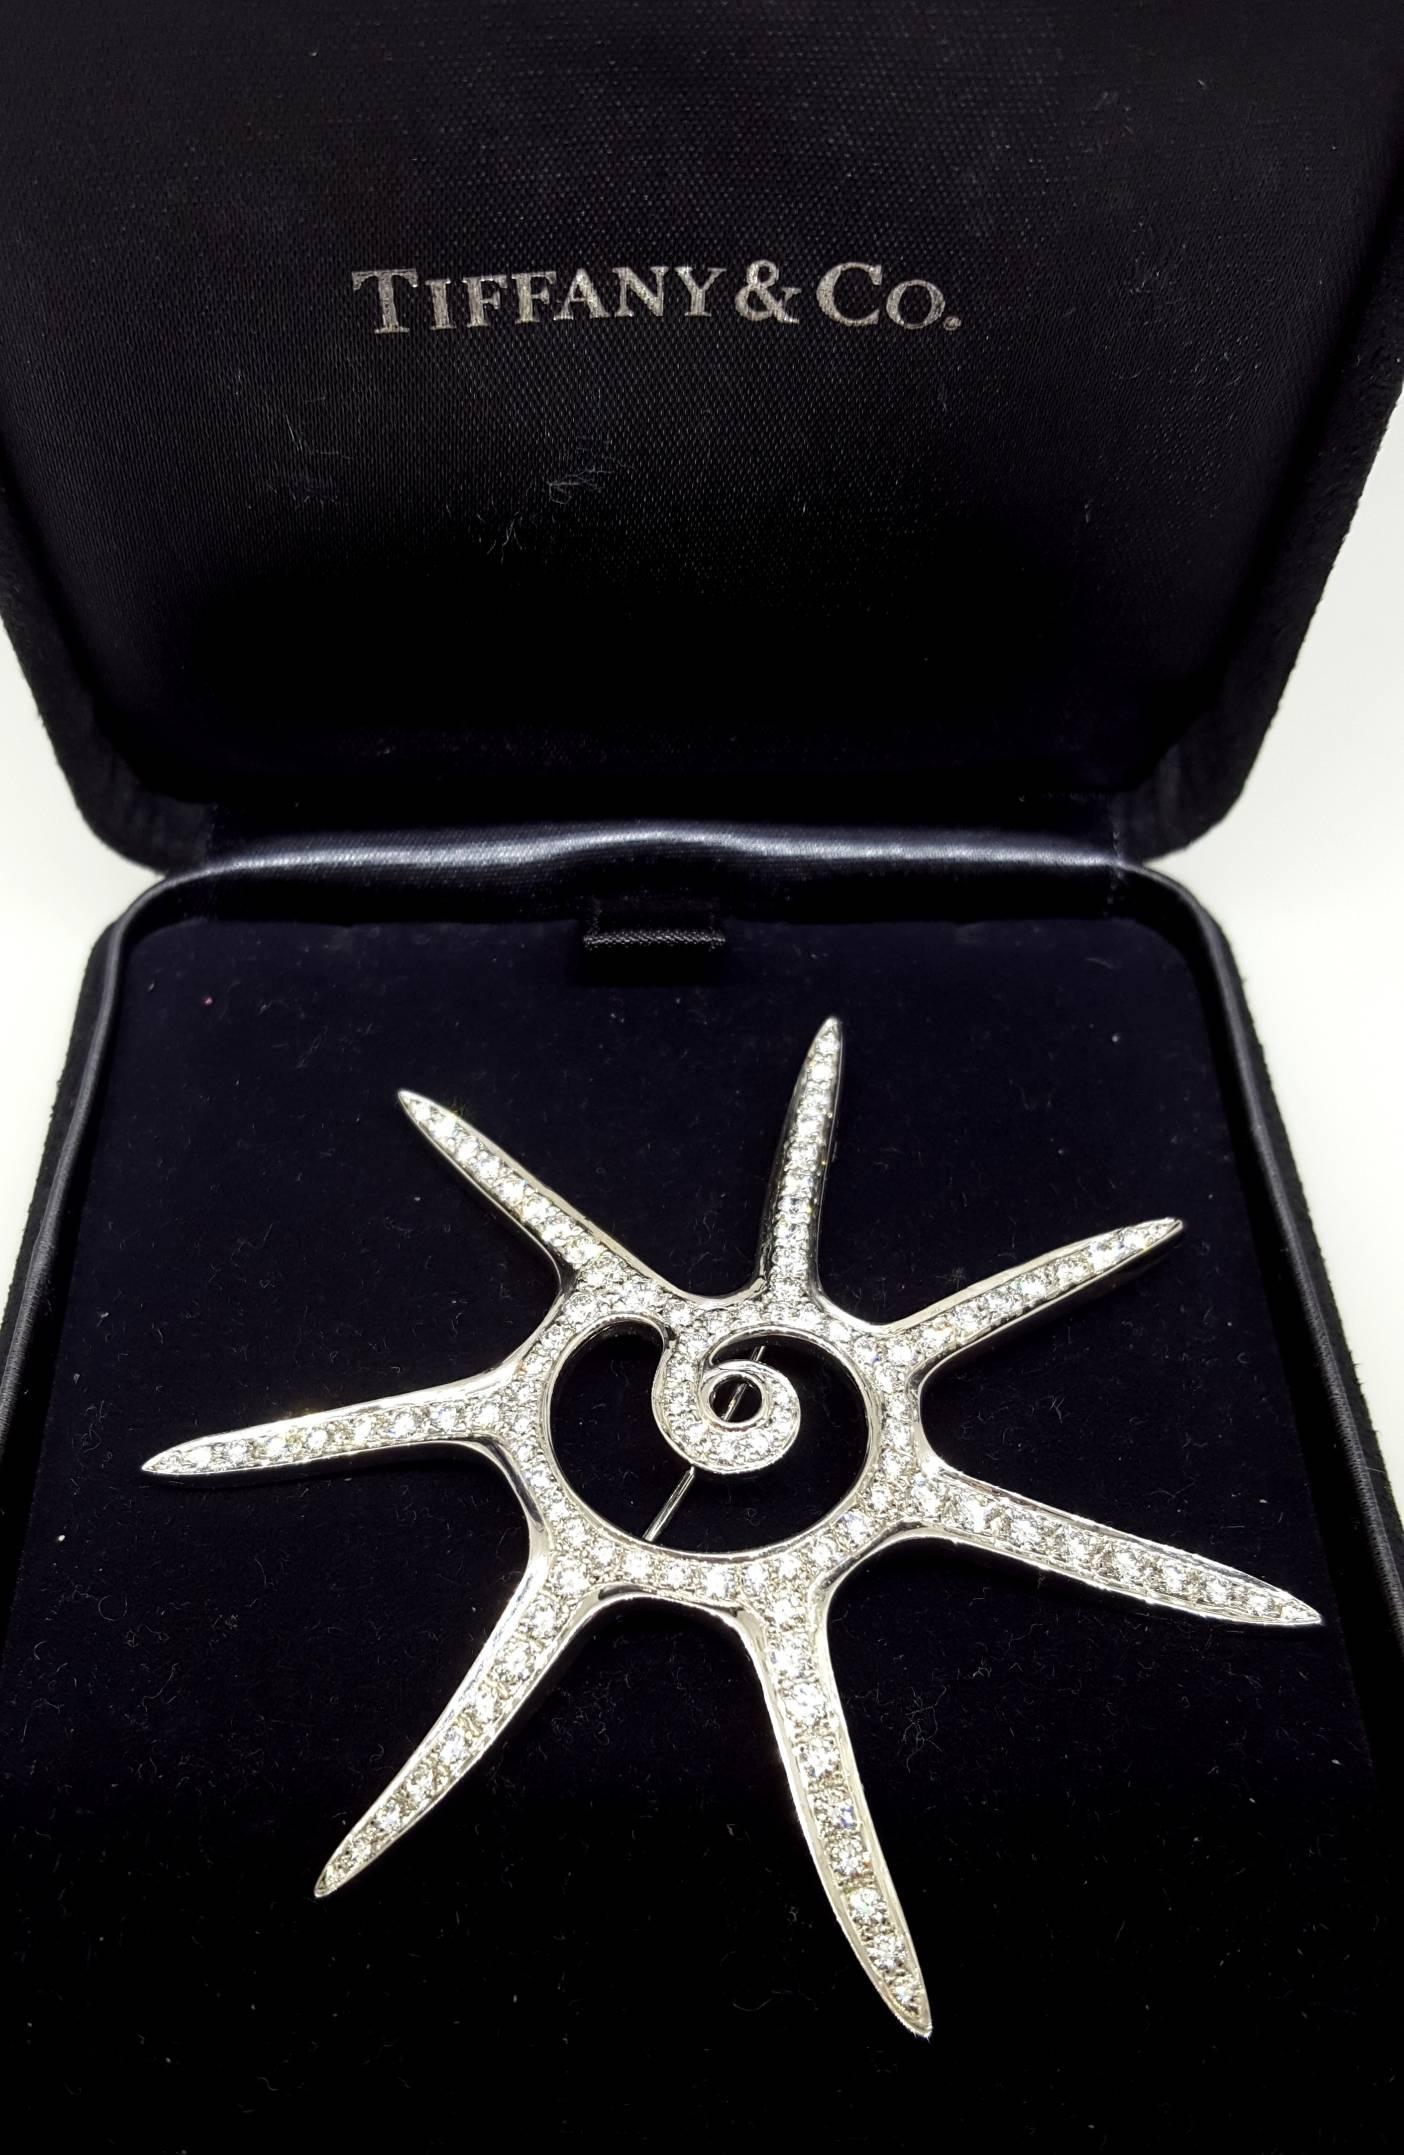 Platinum Tiffany Star Brooch In Excellent Condition For Sale In Lake Forest, IL